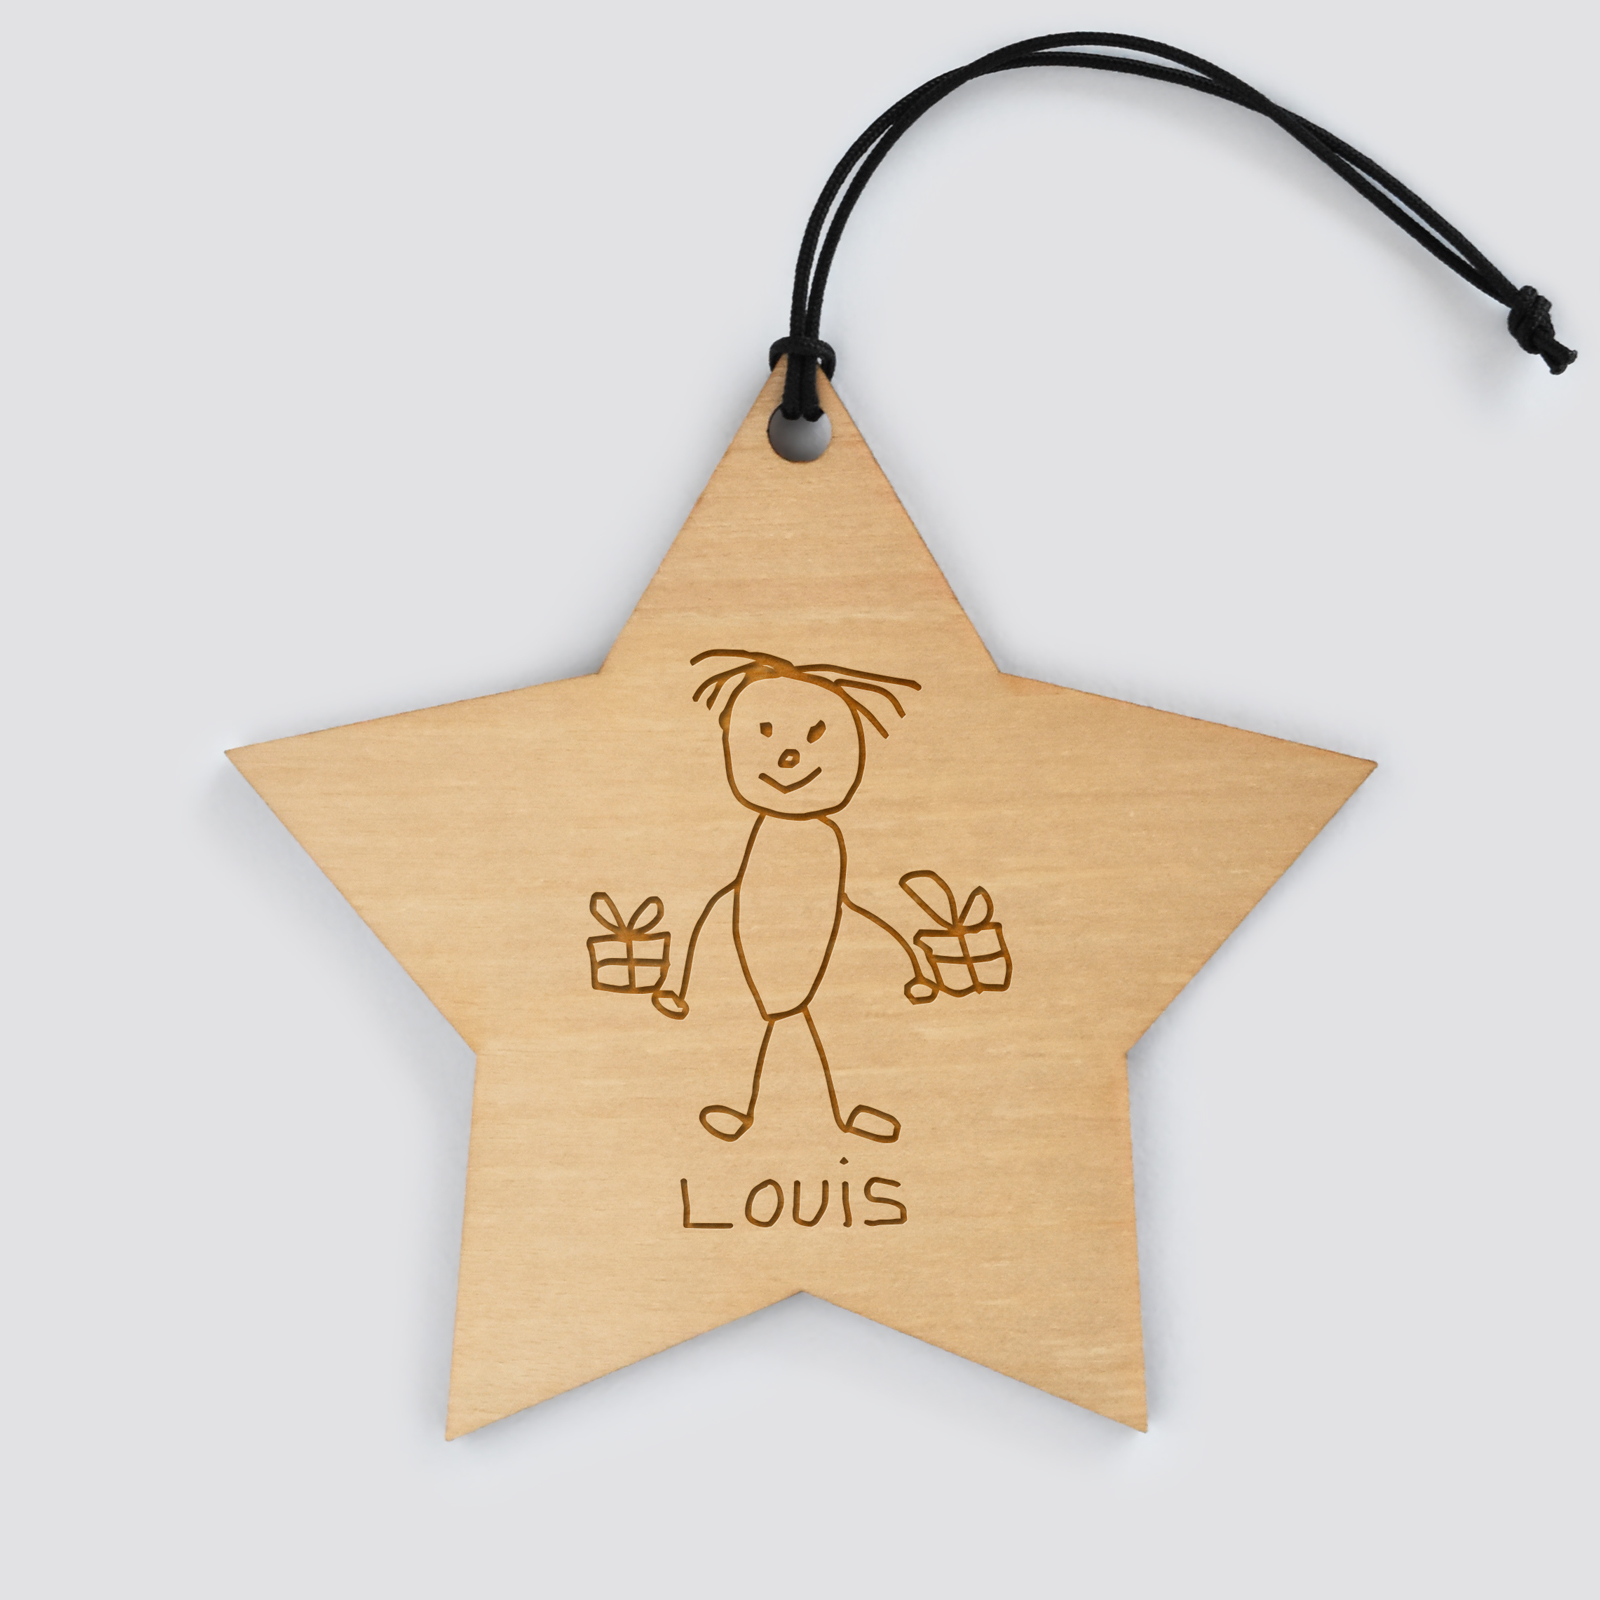 Personalised engraved wooden star Christmas bauble - sketch